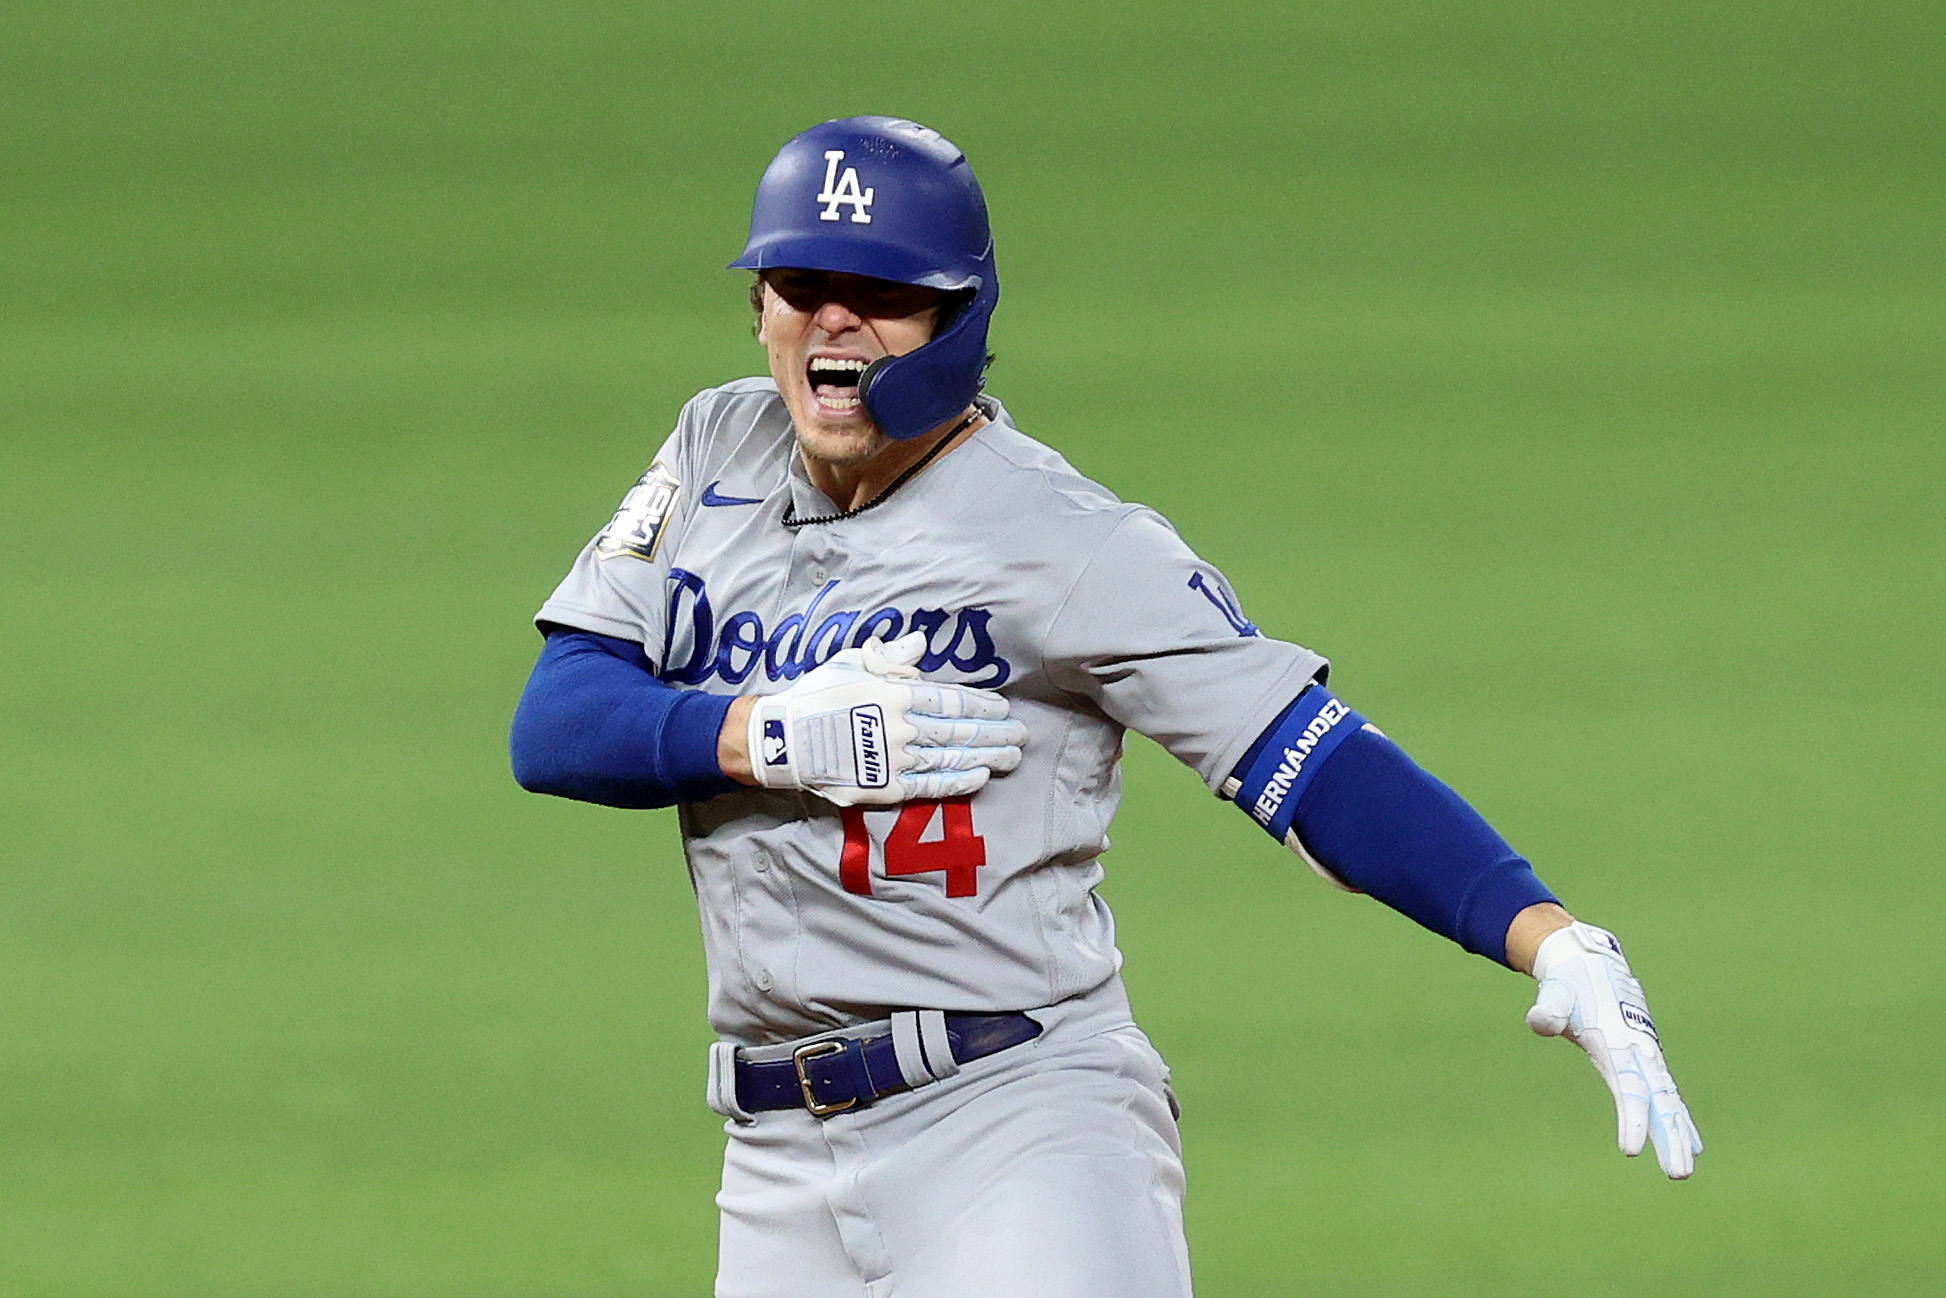 Dodgers Rumors: Kiké Hernandez May Be Available in a Trade with the Red Sox